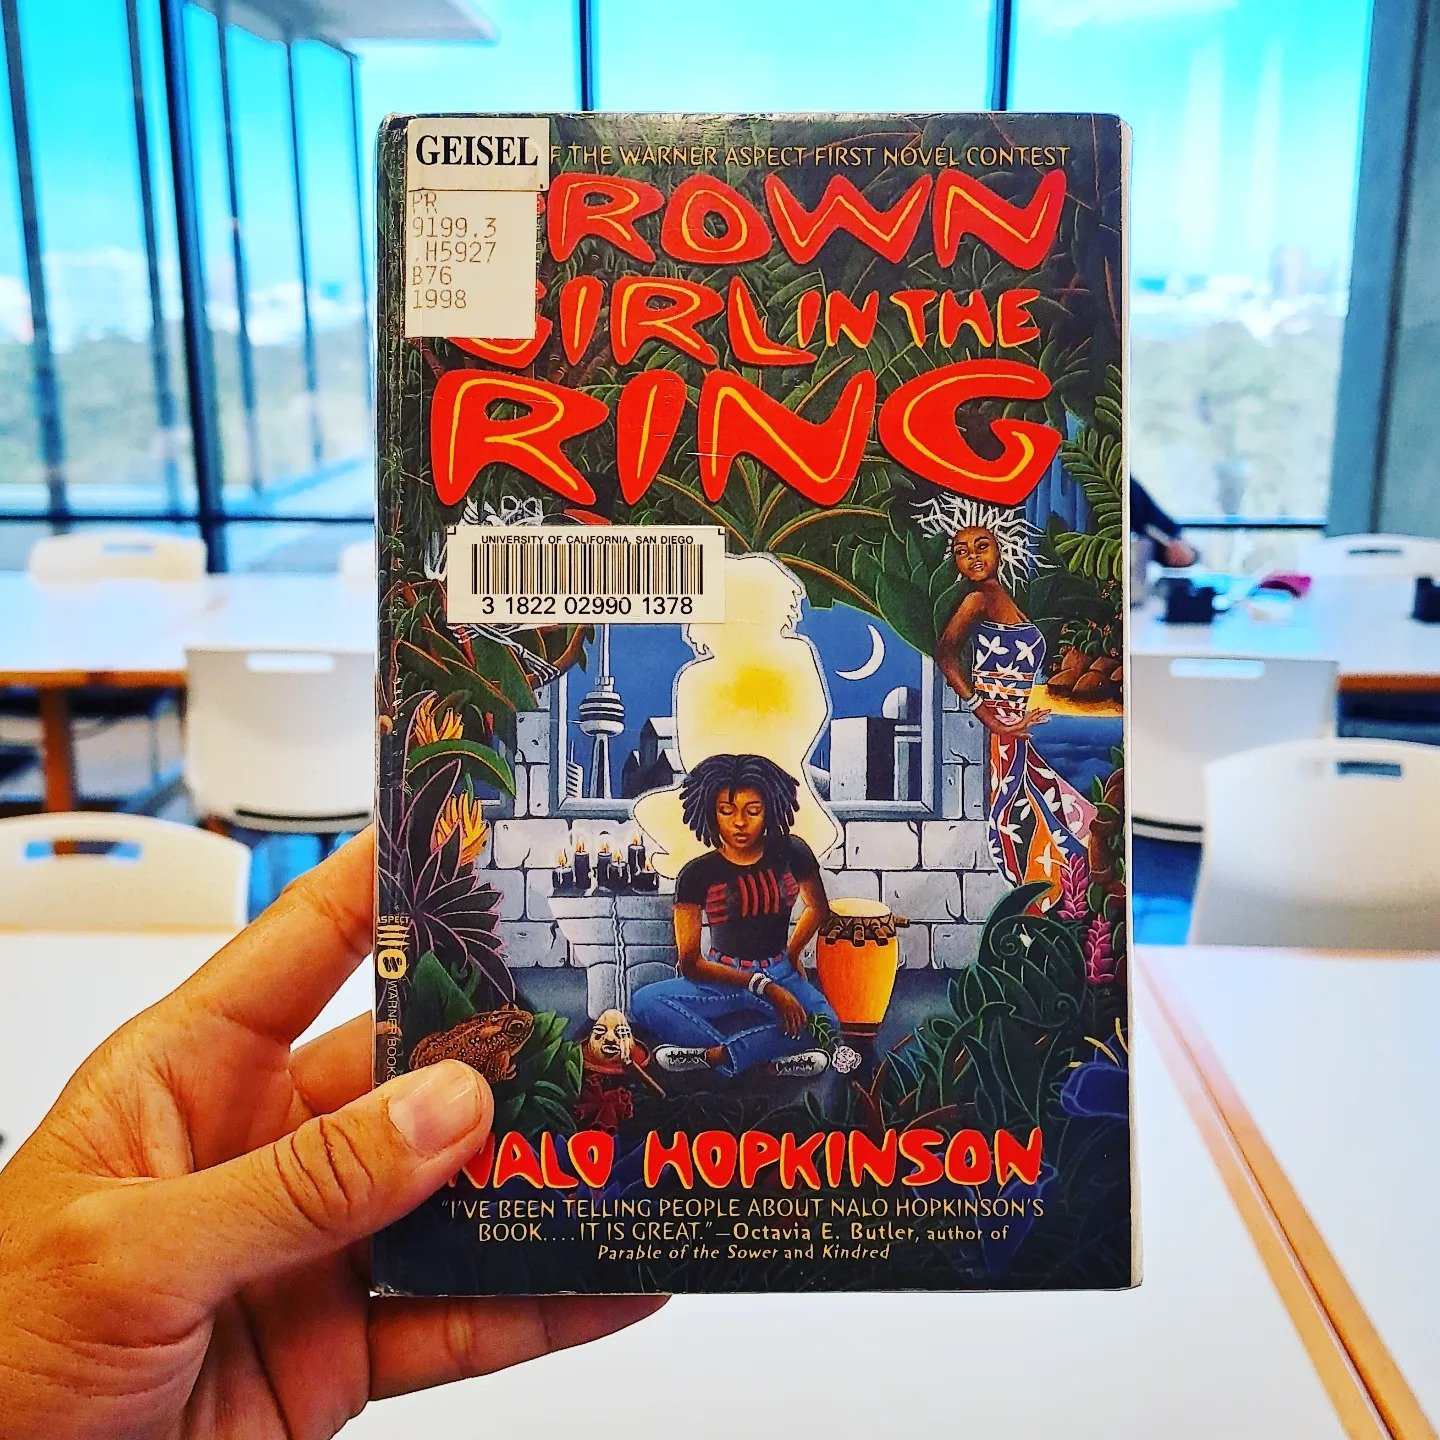 Golden Apples Of The West: Nalo Hopkinson - Brown Girl In The Ring (1998)